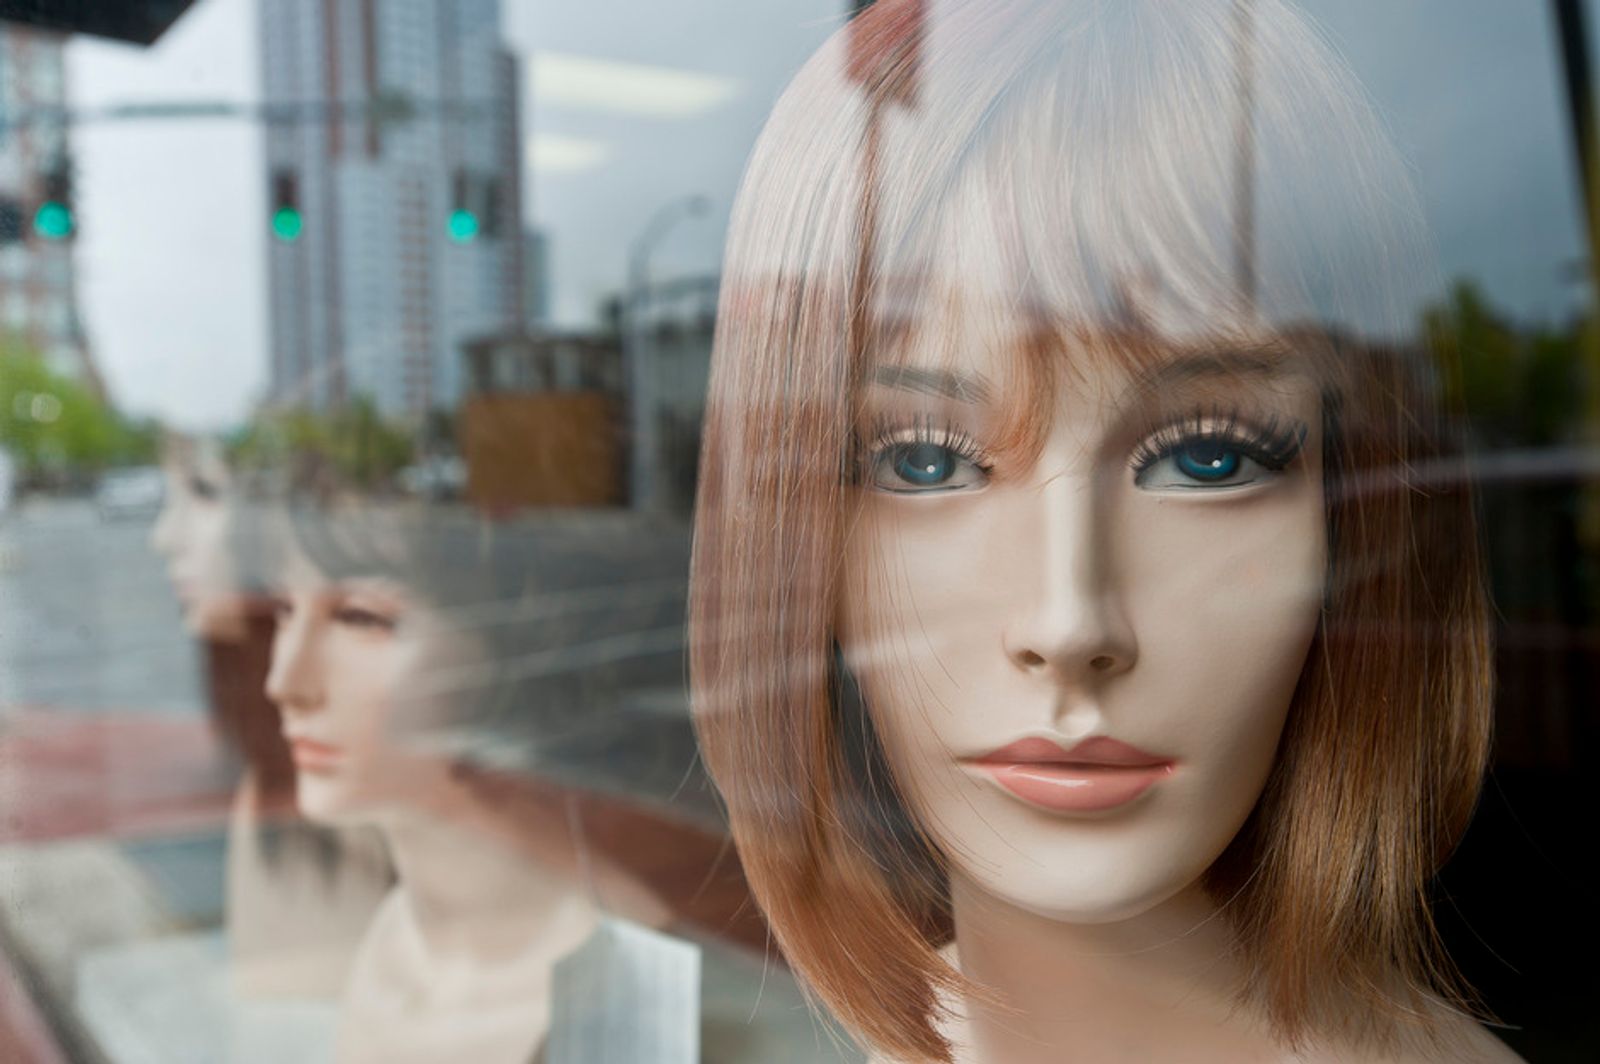 © Steven Edson - Store mannequins in window. New Rochelle, NY